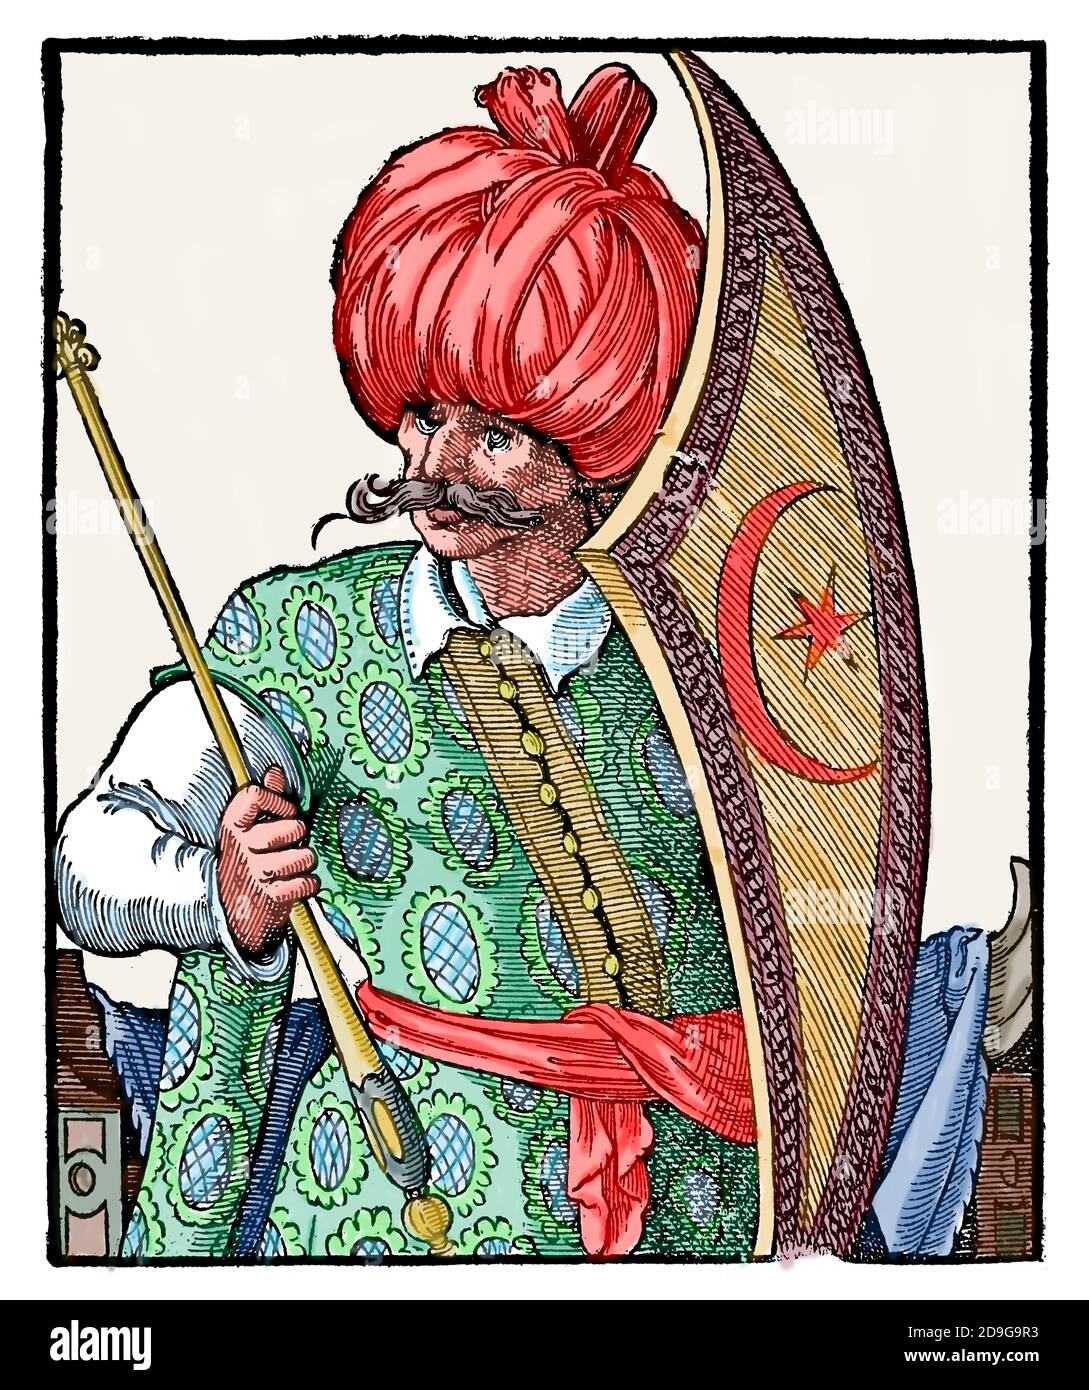 Modern era. Ottoman Empire. 16th century. Turk with shield and scepter. Engraving by Jost Amman, 16th century. Later colouration. Stock Photo